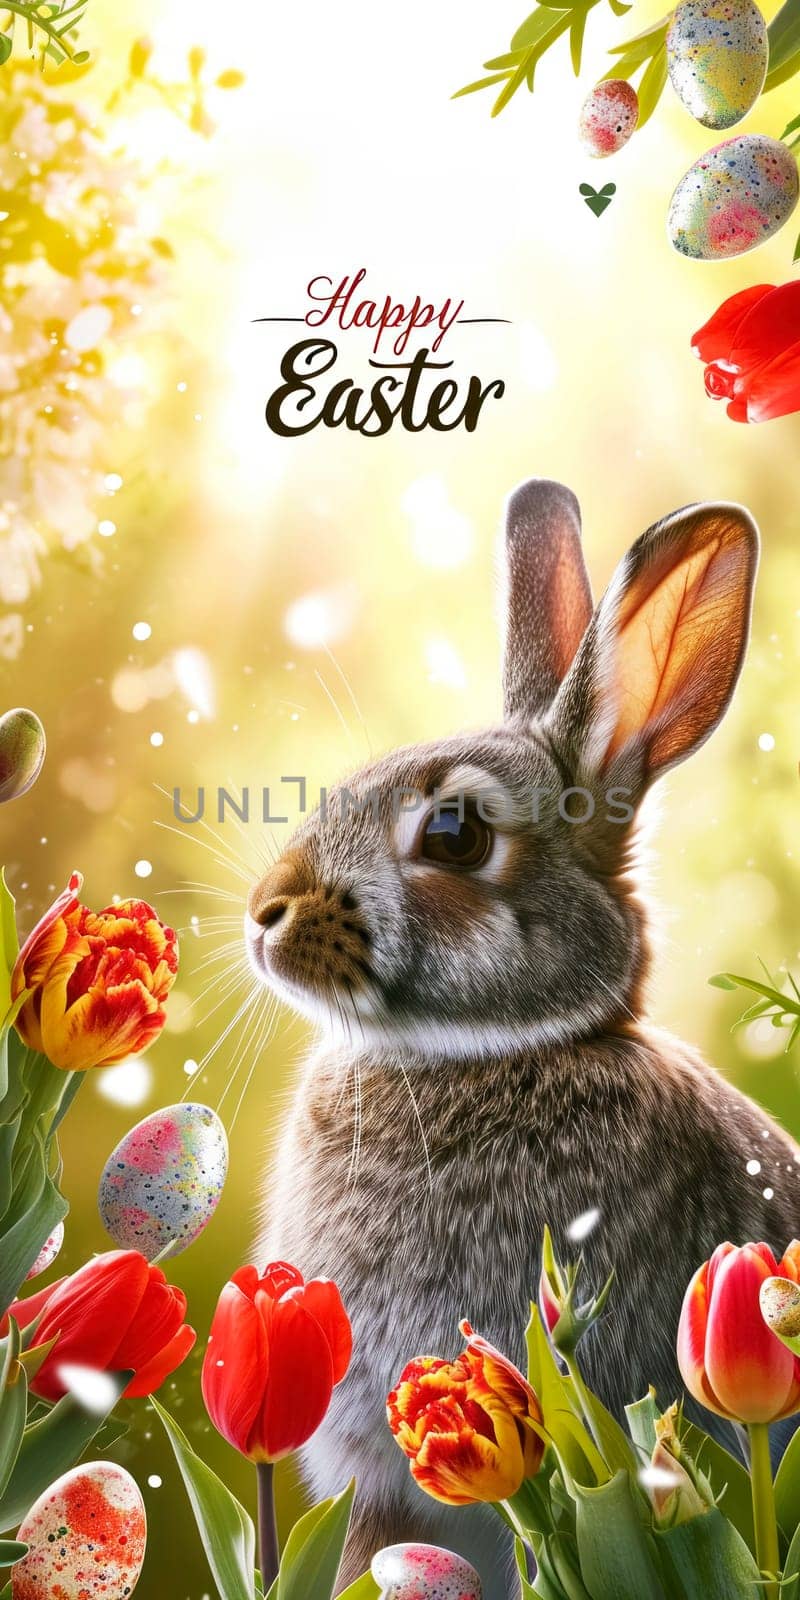 A festive Easter banner depicting a lifelike bunny with red tulips and decorated Easter eggs, embodying the joy of the holiday